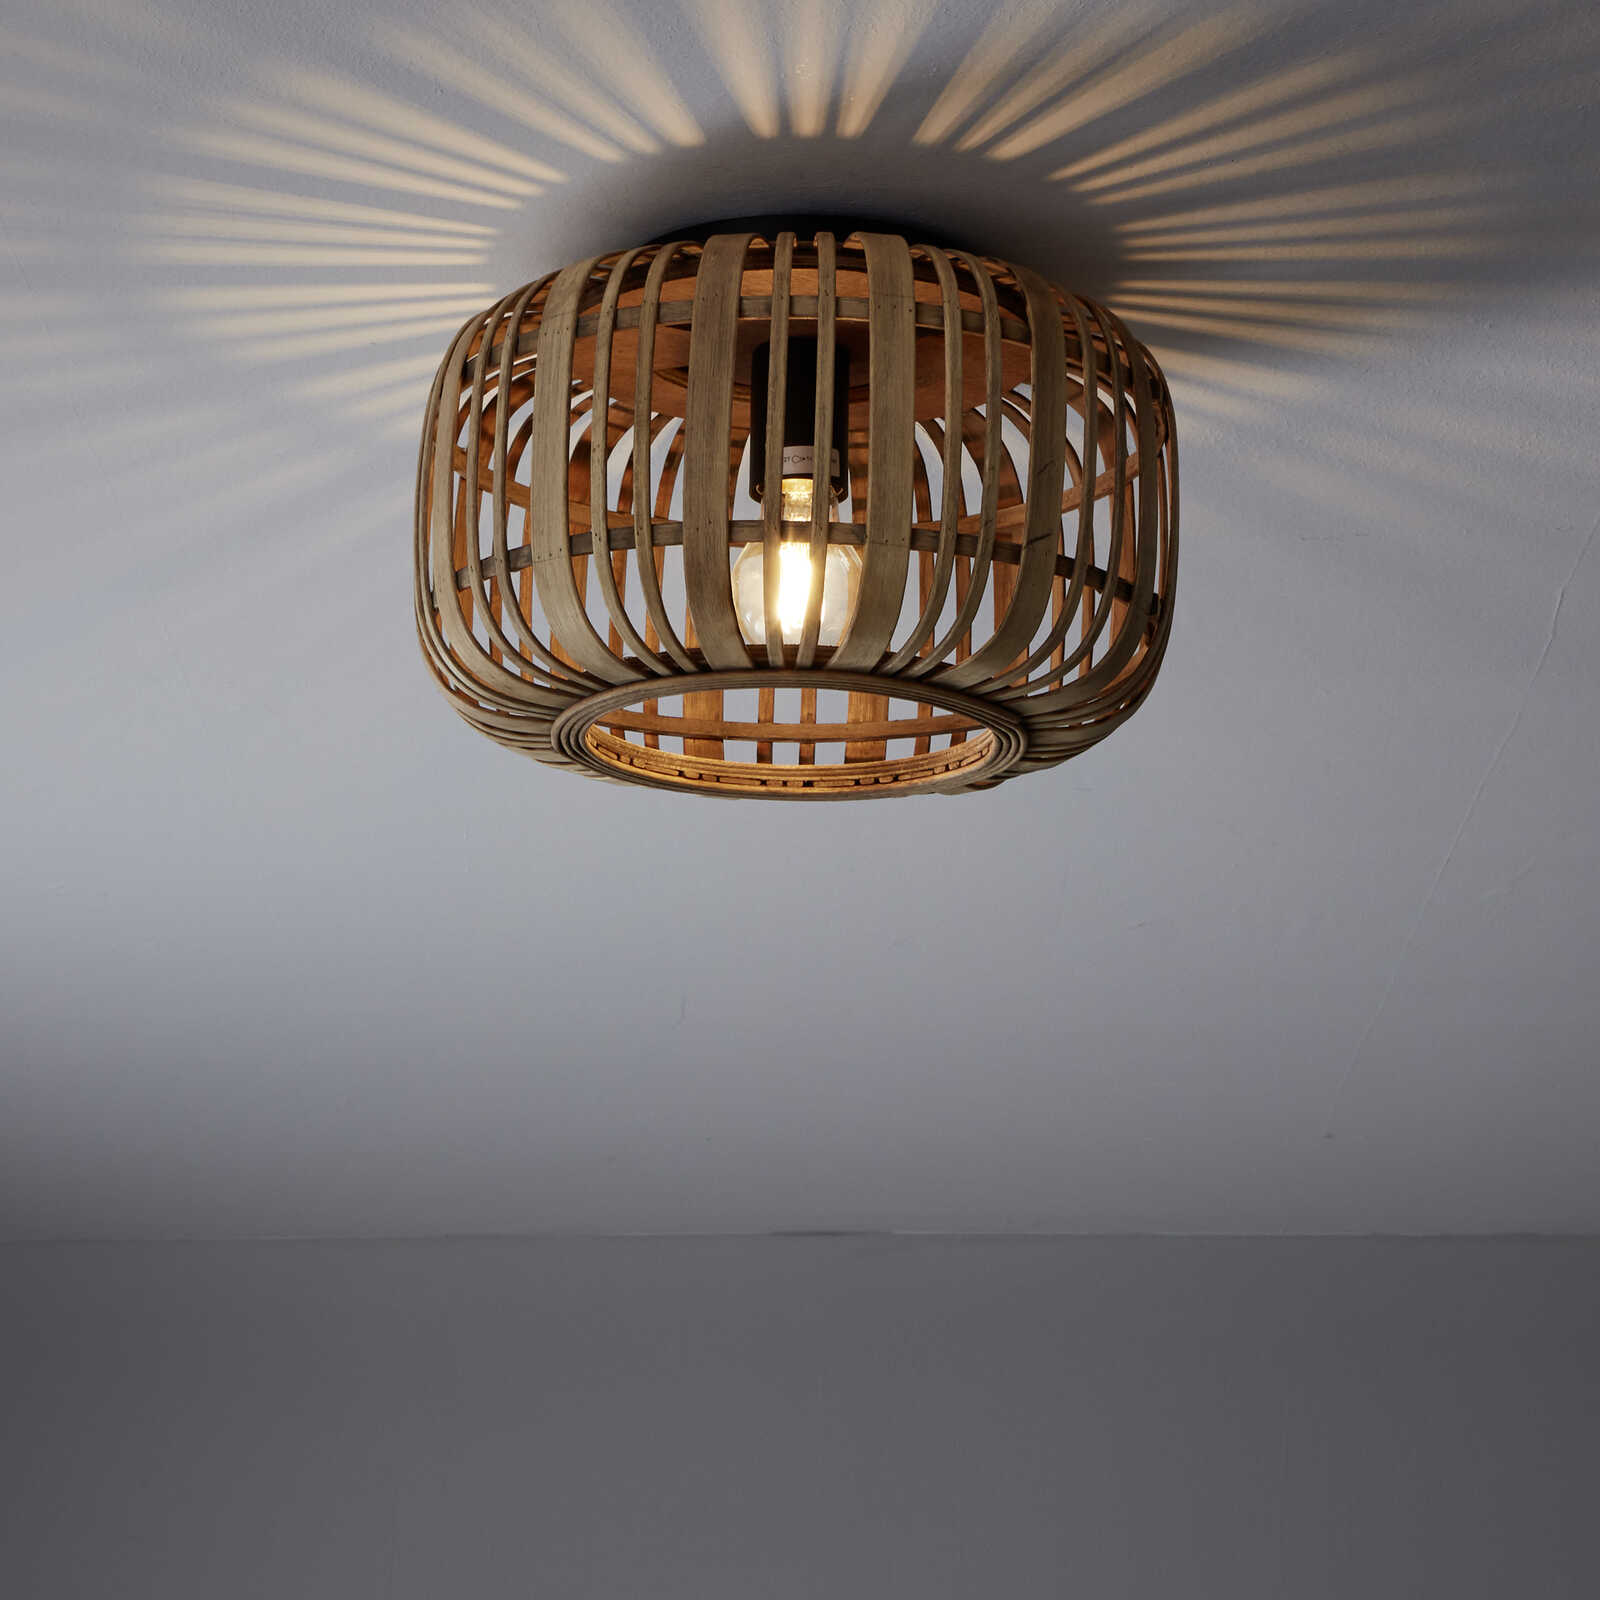             Bamboo ceiling light - Willi 4 - Brown
        